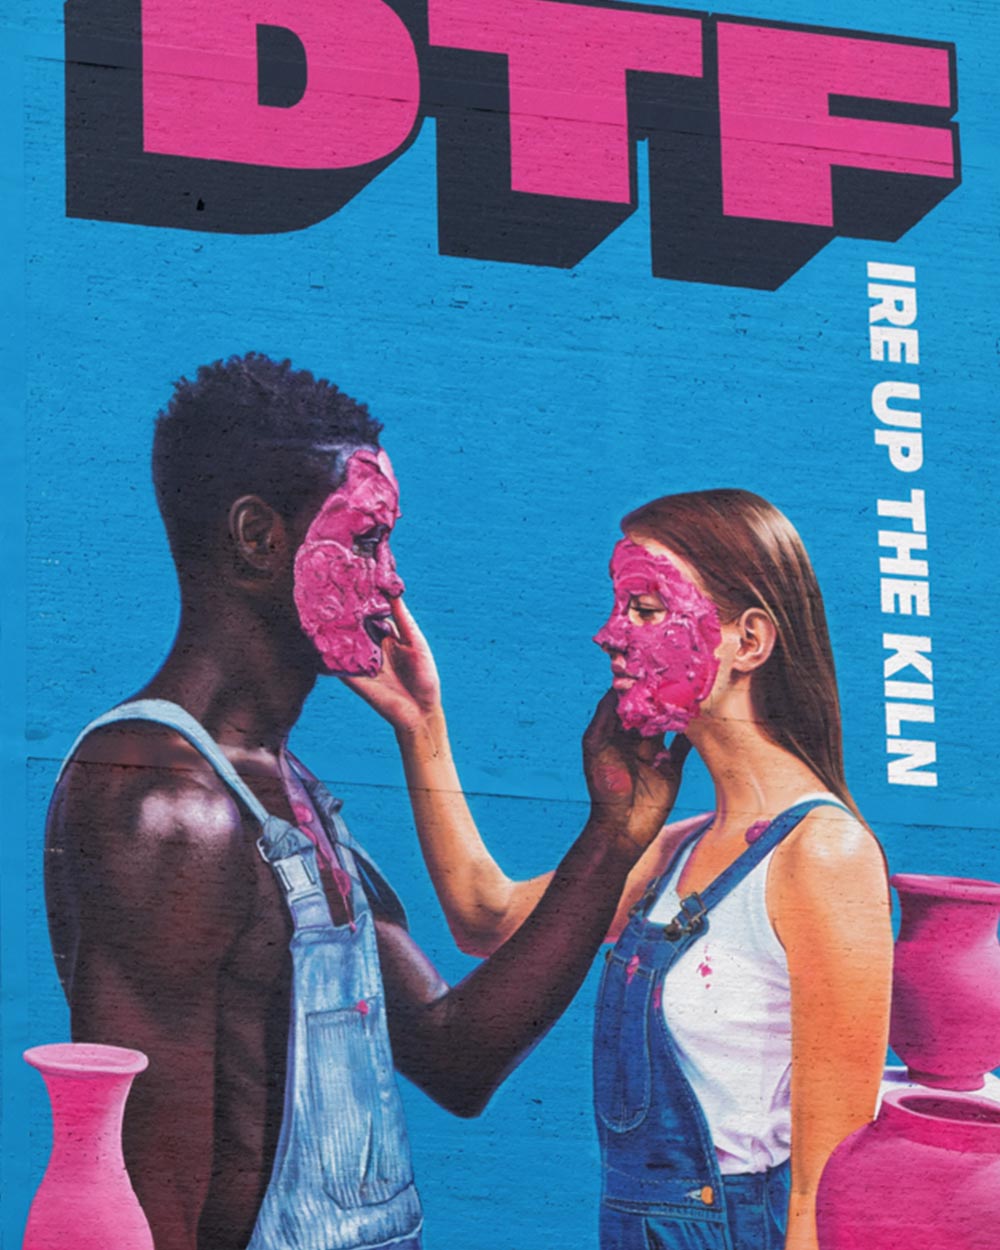 Colossal Media hand paints advertisement for OkCupid